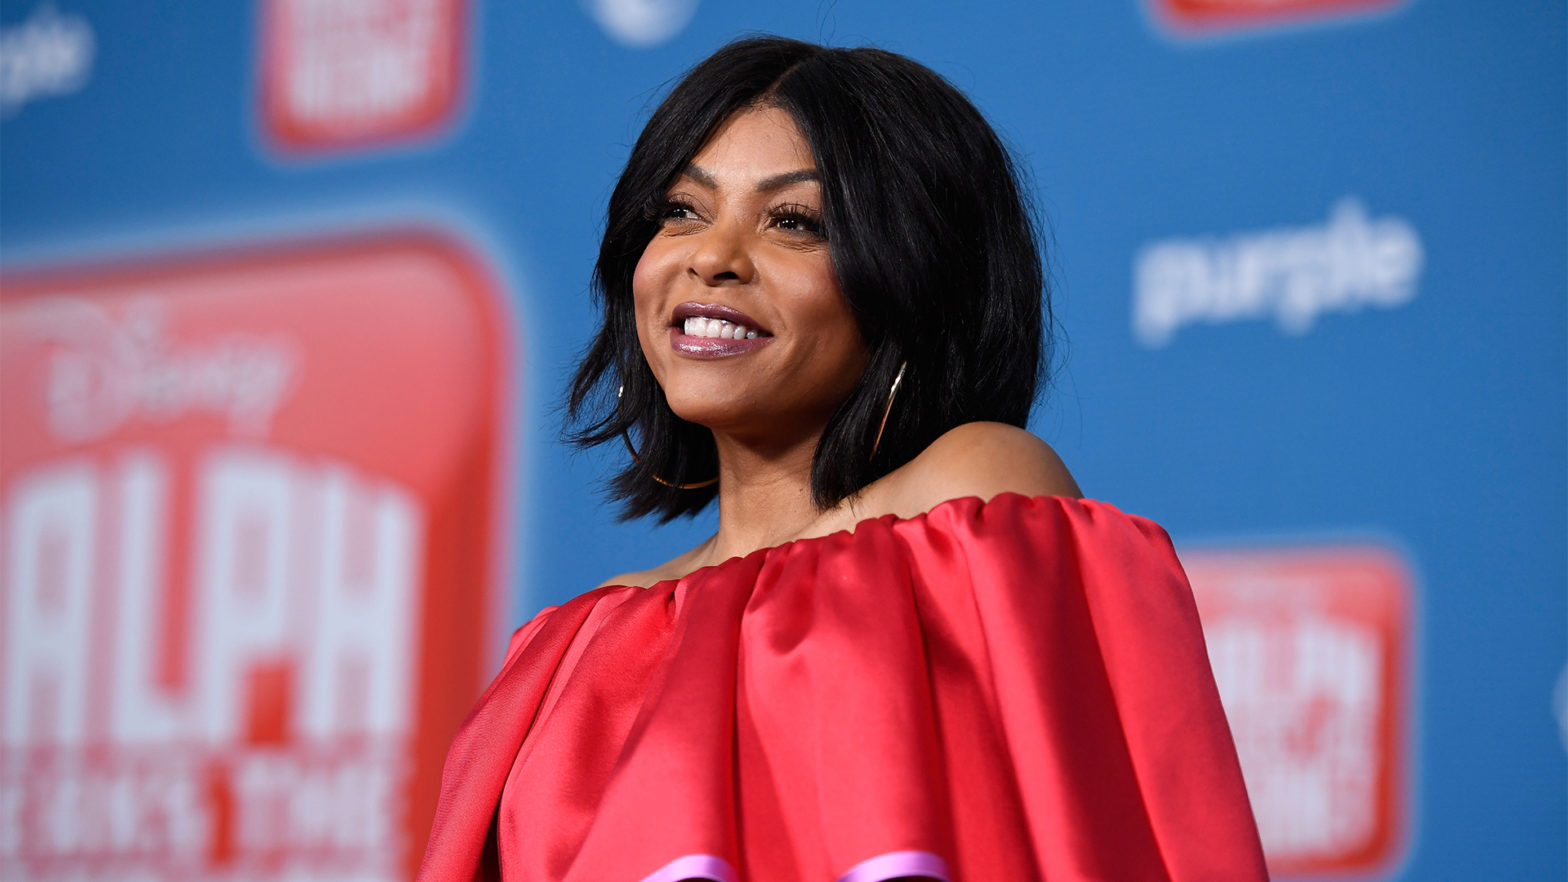 Taraji P. Henson Expands Her Brand TPH With Launch Of Affordable Body Care Collection For All Skin Types